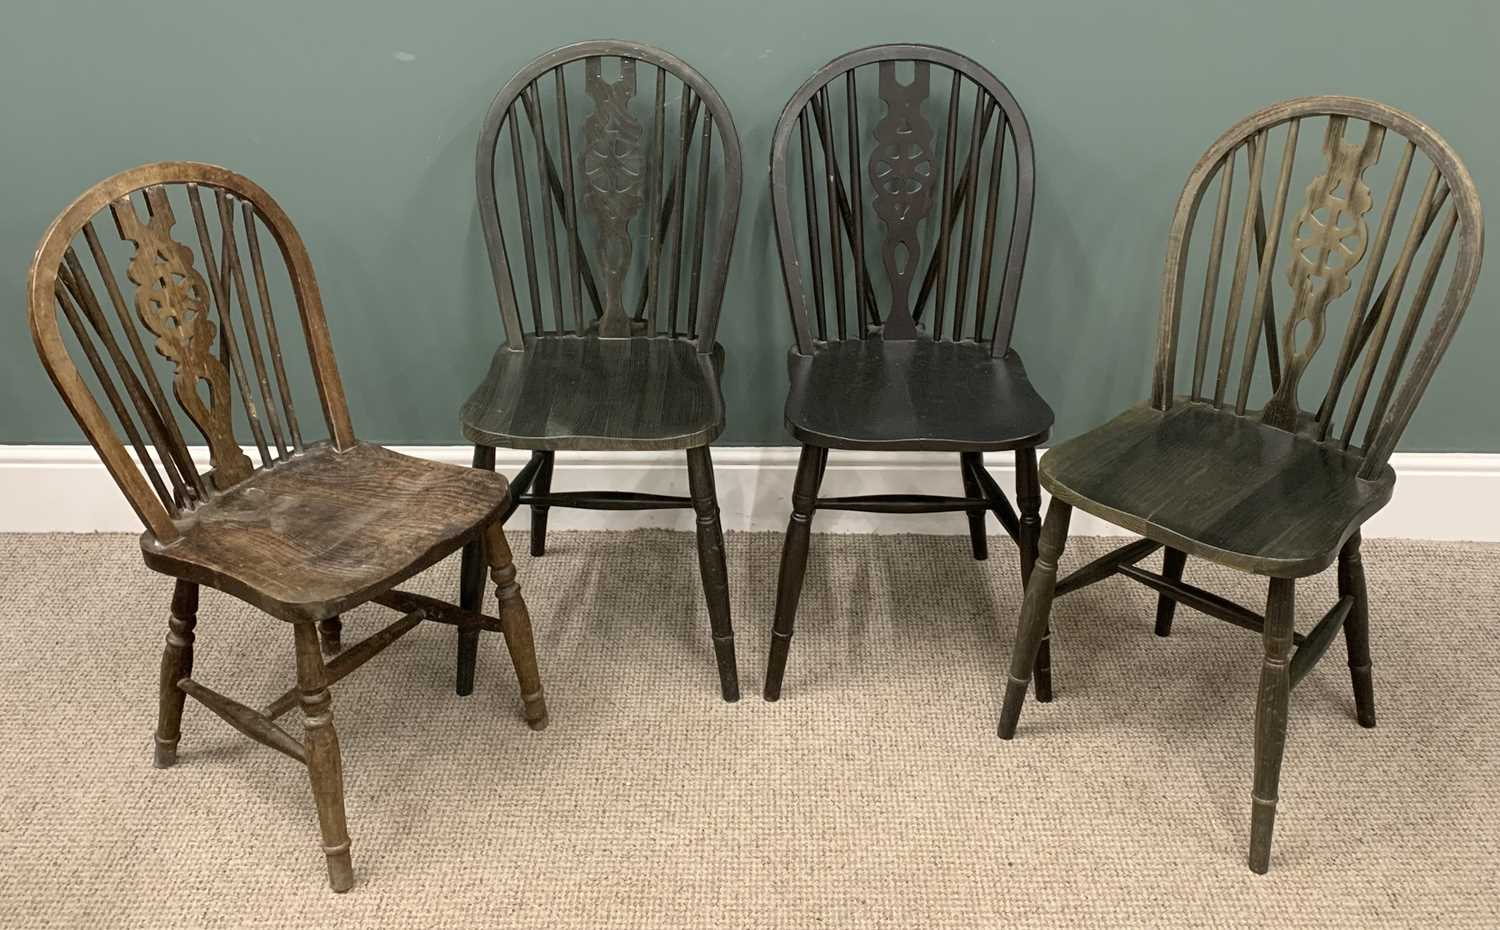 VARIOUS CHAIRS to include Windsor, wheelback, farmhouse and a carved Eisteddfod chair (13) - Image 7 of 8